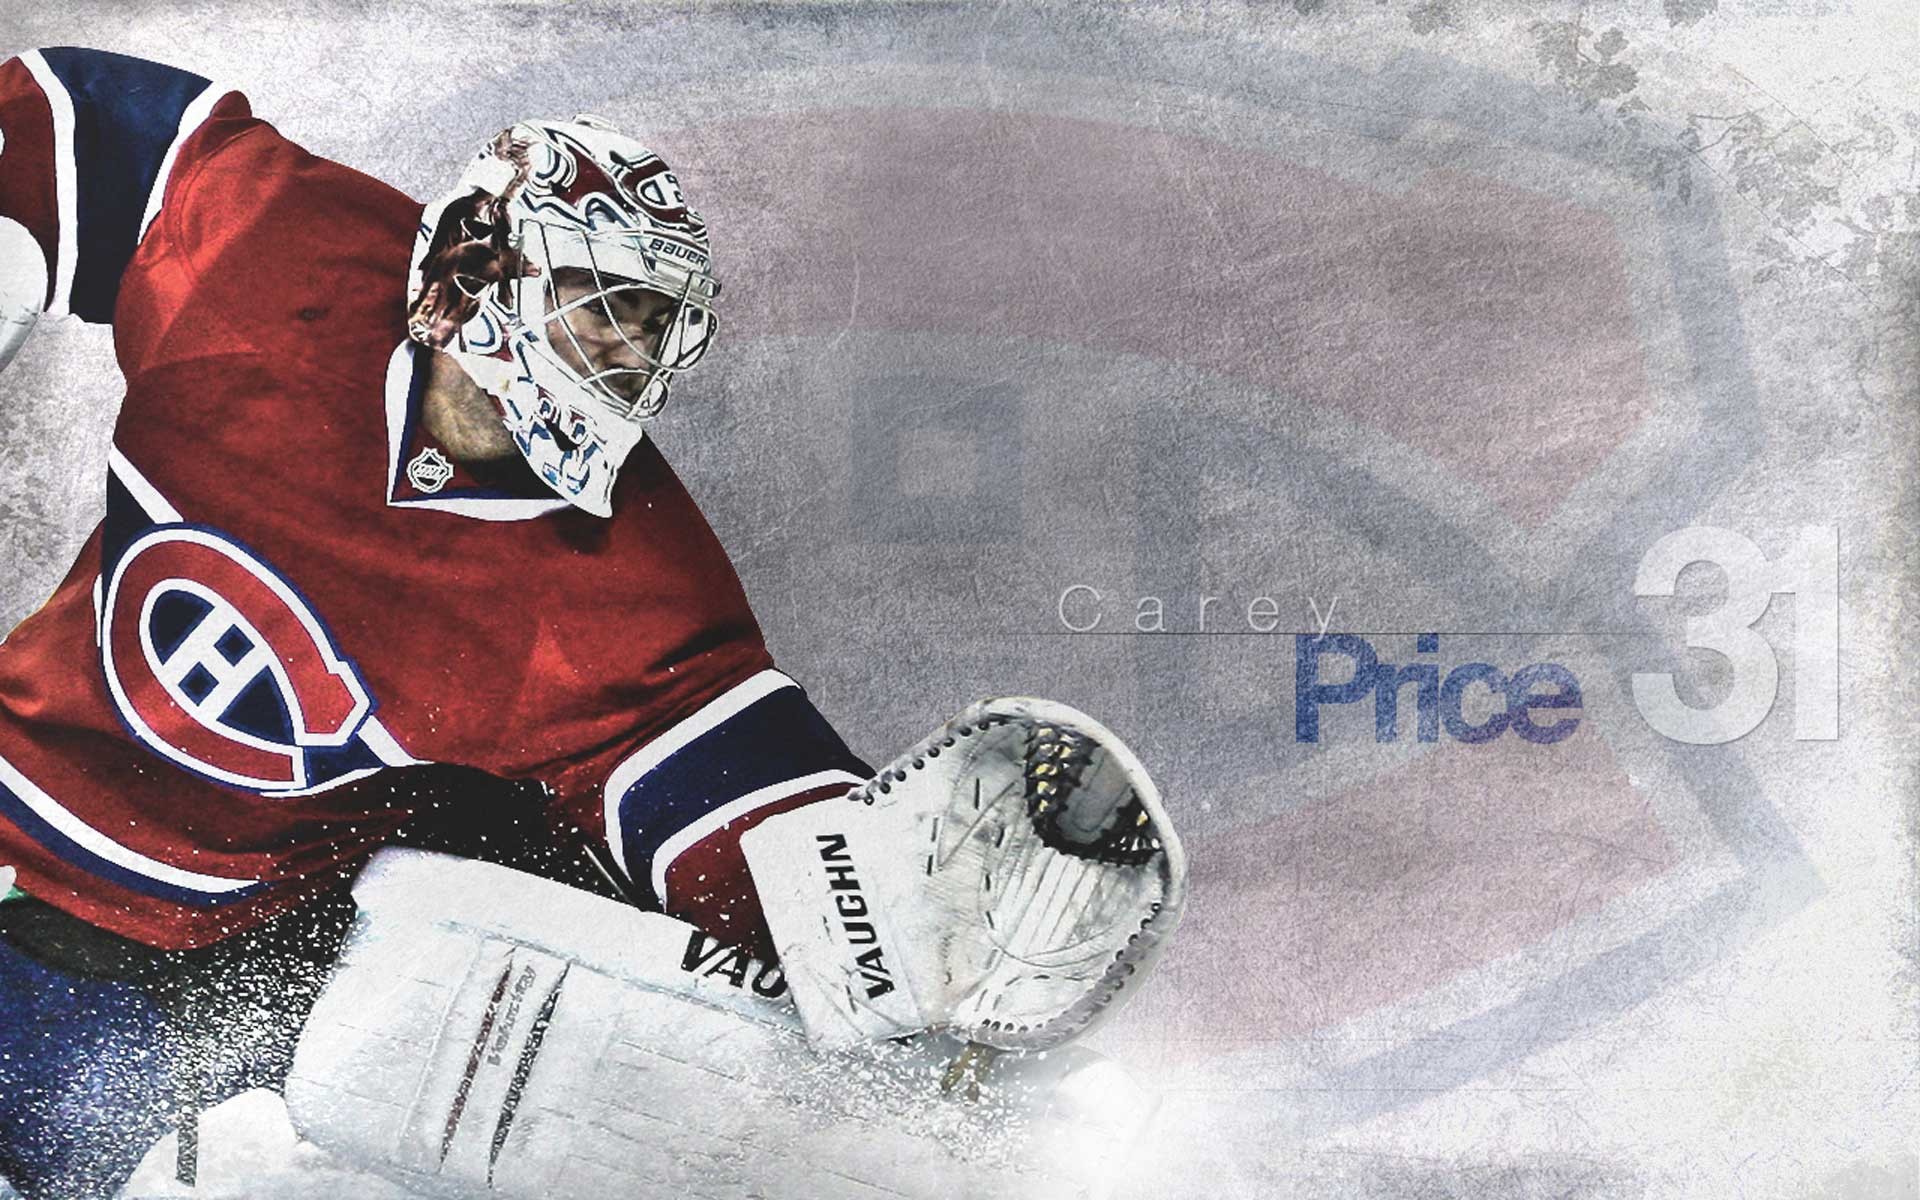 1920x1200 Carey Price Wallpapers | Montreal Habs | Montreal Hockey | #1